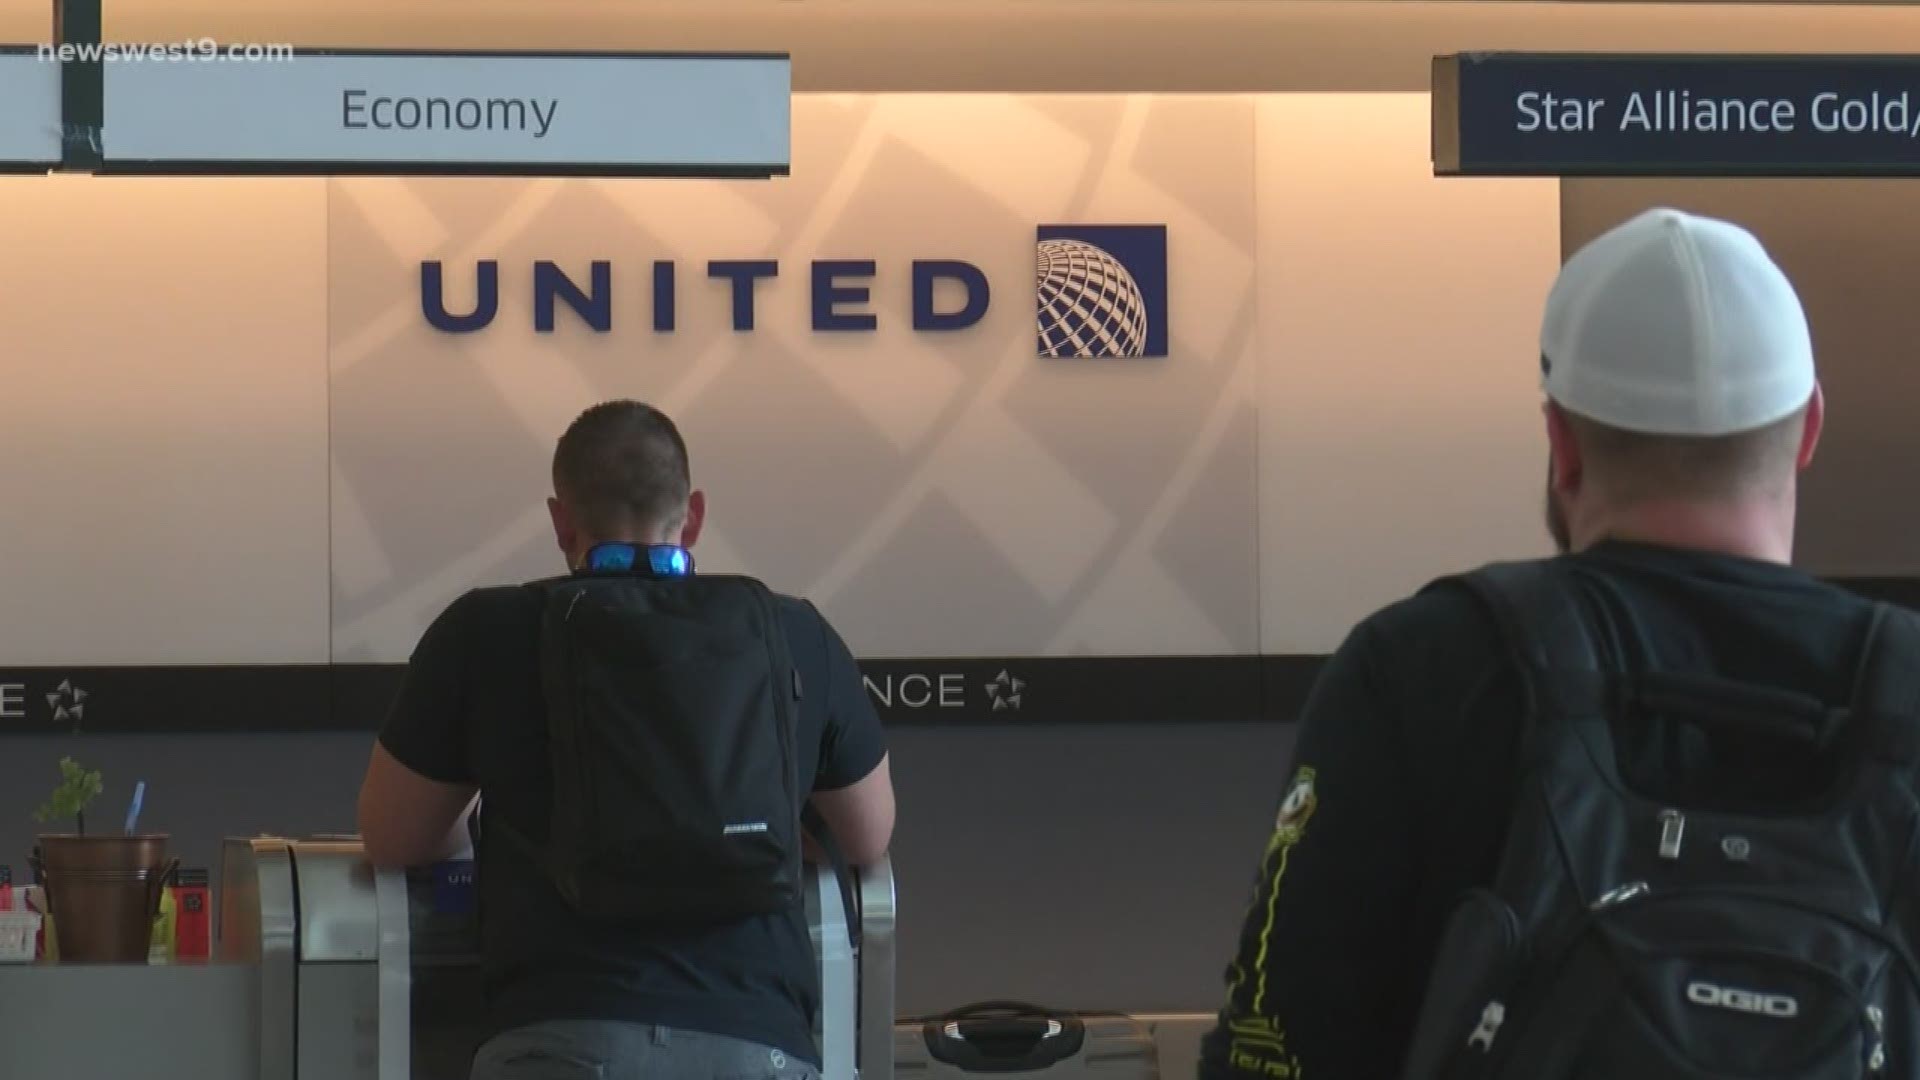 Coming this fall, United Airlines may wait up to ten minutes for passengers with delayed flights